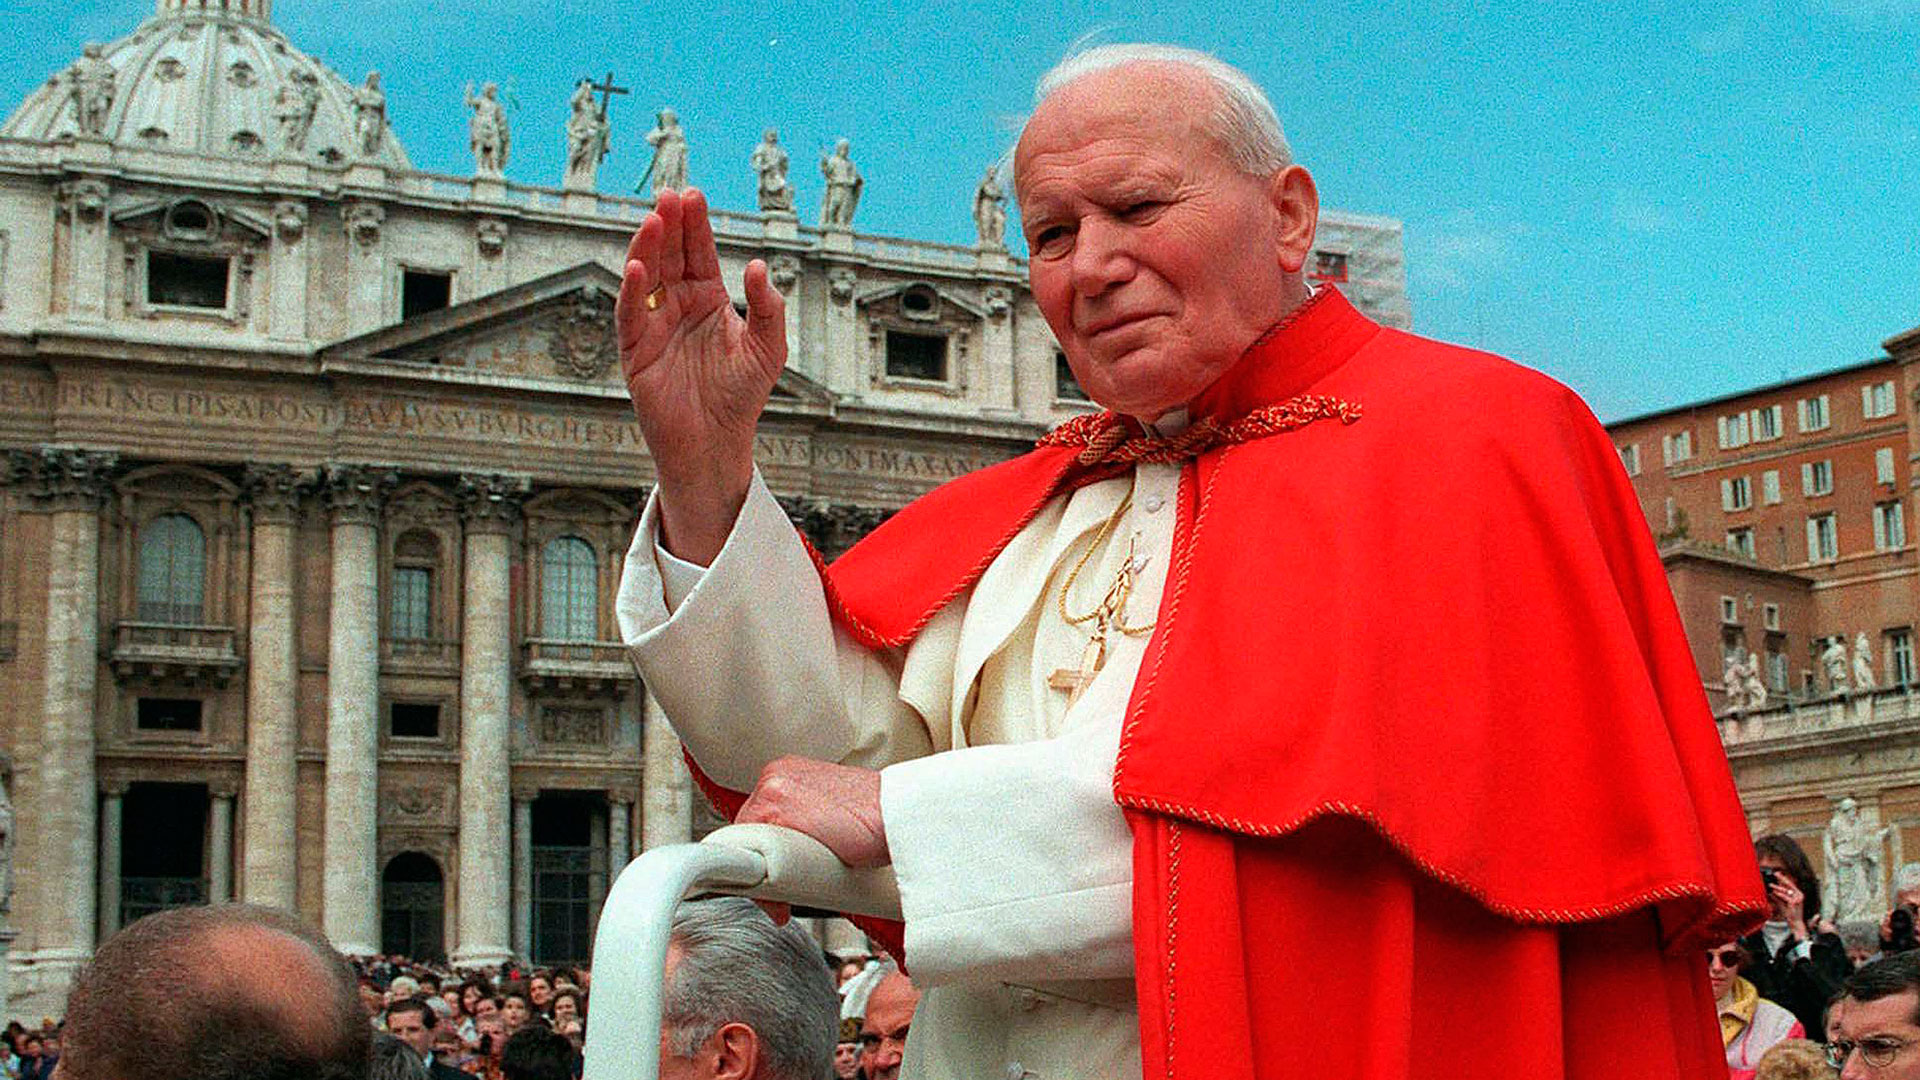 Pope Saint John Paul Ii In Saint Peter'S Square.  In 1997, He Told Believers About The Dogma Of The Faith Of The Assumption Of The Virgin Mary (Ap).